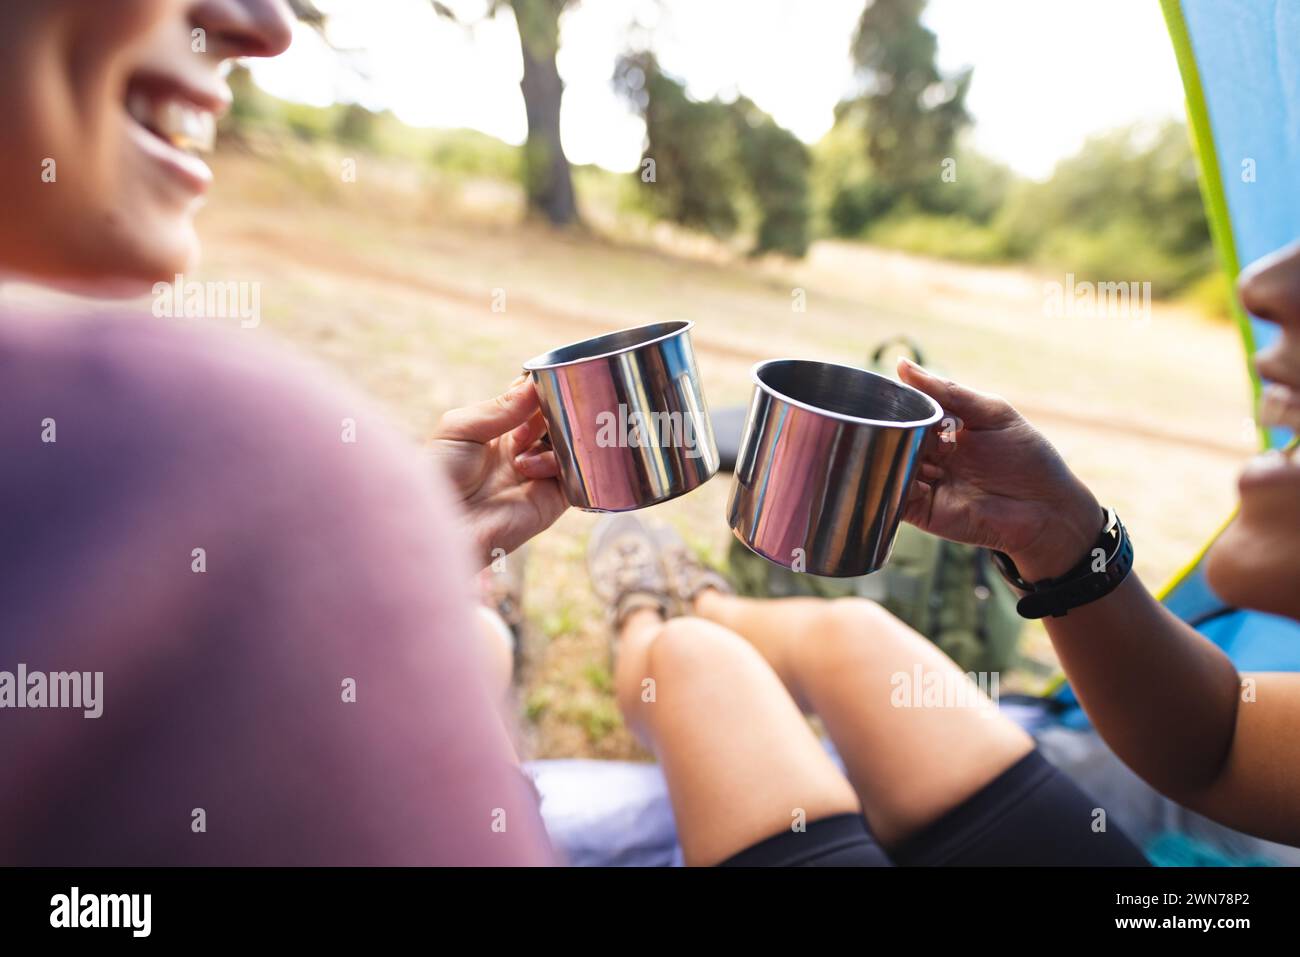 Two women cheer with metal cups, sharing a joyful moment outdoors Stock Photo